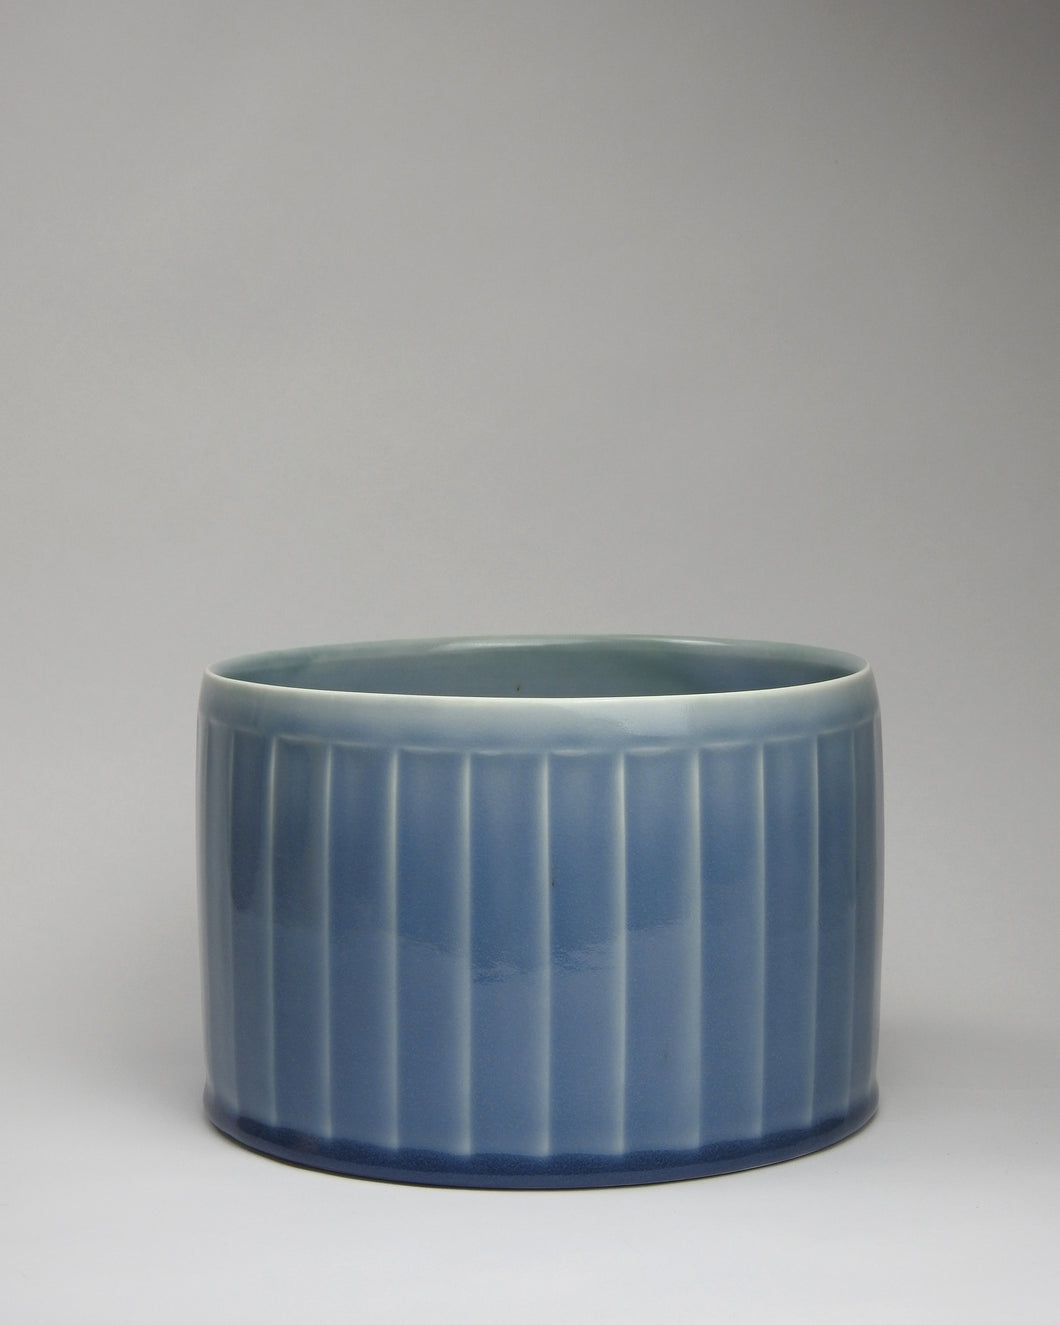 2. susan frost faceted bowl